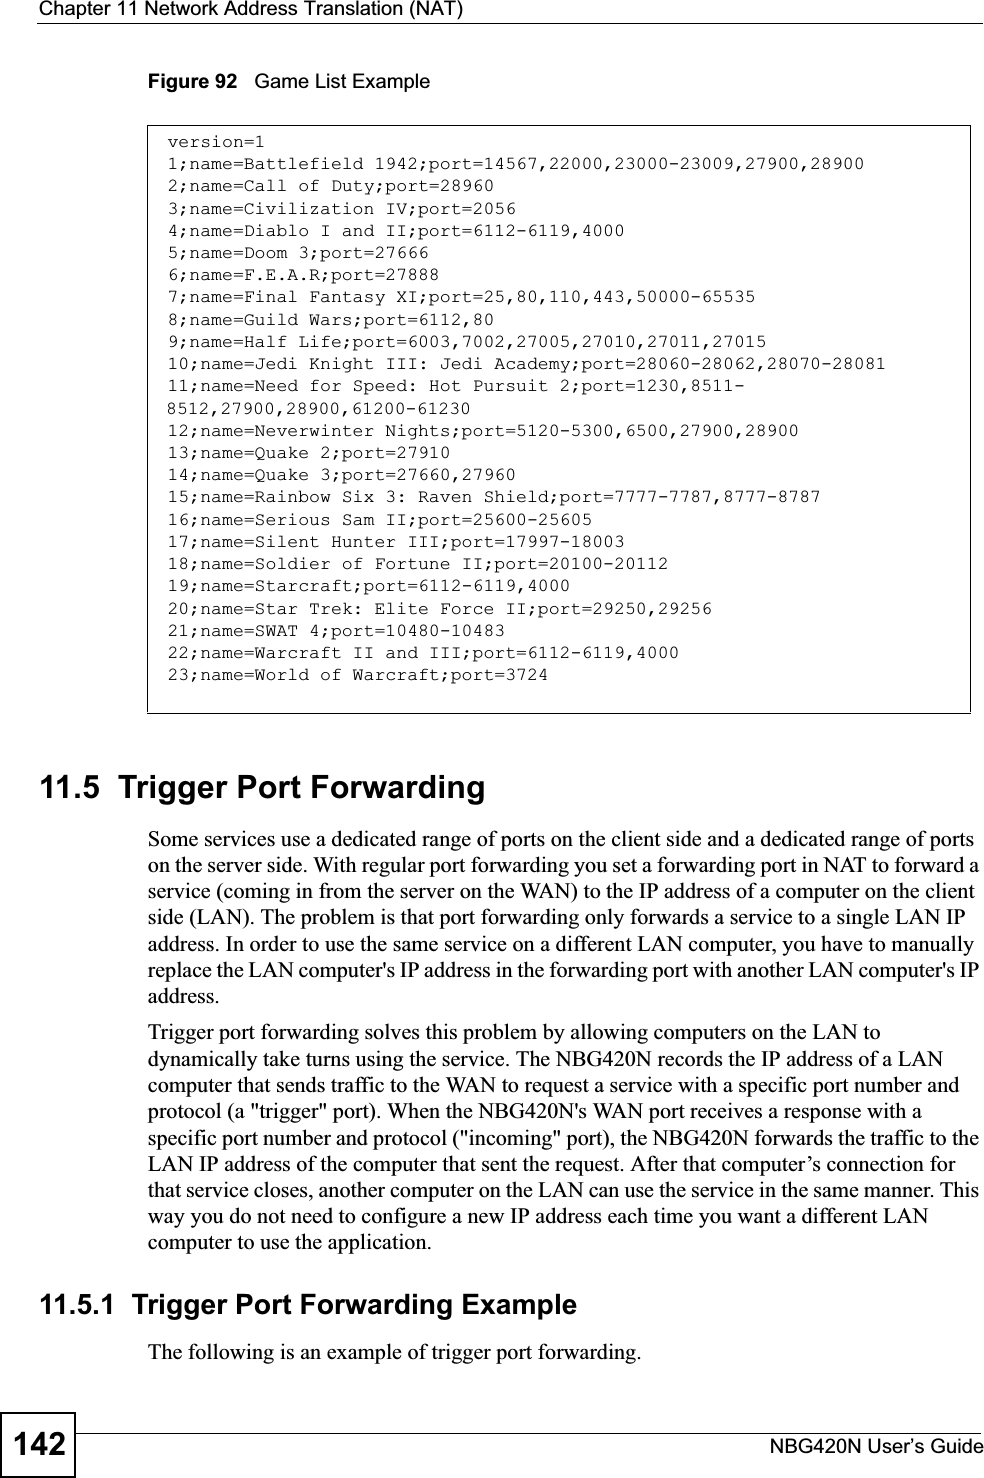 Chapter 11 Network Address Translation (NAT)NBG420N User’s Guide142Figure 92   Game List Example11.5  Trigger Port Forwarding Some services use a dedicated range of ports on the client side and a dedicated range of ports on the server side. With regular port forwarding you set a forwarding port in NAT to forward a service (coming in from the server on the WAN) to the IP address of a computer on the client side (LAN). The problem is that port forwarding only forwards a service to a single LAN IP address. In order to use the same service on a different LAN computer, you have to manually replace the LAN computer&apos;s IP address in the forwarding port with another LAN computer&apos;s IP address. Trigger port forwarding solves this problem by allowing computers on the LAN to dynamically take turns using the service. The NBG420N records the IP address of a LAN computer that sends traffic to the WAN to request a service with a specific port number and protocol (a &quot;trigger&quot; port). When the NBG420N&apos;s WAN port receives a response with a specific port number and protocol (&quot;incoming&quot; port), the NBG420N forwards the traffic to the LAN IP address of the computer that sent the request. After that computer’s connection for that service closes, another computer on the LAN can use the service in the same manner. This way you do not need to configure a new IP address each time you want a different LAN computer to use the application.11.5.1  Trigger Port Forwarding Example The following is an example of trigger port forwarding.version=11;name=Battlefield 1942;port=14567,22000,23000-23009,27900,289002;name=Call of Duty;port=289603;name=Civilization IV;port=20564;name=Diablo I and II;port=6112-6119,40005;name=Doom 3;port=276666;name=F.E.A.R;port=278887;name=Final Fantasy XI;port=25,80,110,443,50000-655358;name=Guild Wars;port=6112,809;name=Half Life;port=6003,7002,27005,27010,27011,2701510;name=Jedi Knight III: Jedi Academy;port=28060-28062,28070-2808111;name=Need for Speed: Hot Pursuit 2;port=1230,8511-8512,27900,28900,61200-6123012;name=Neverwinter Nights;port=5120-5300,6500,27900,2890013;name=Quake 2;port=2791014;name=Quake 3;port=27660,2796015;name=Rainbow Six 3: Raven Shield;port=7777-7787,8777-878716;name=Serious Sam II;port=25600-2560517;name=Silent Hunter III;port=17997-1800318;name=Soldier of Fortune II;port=20100-2011219;name=Starcraft;port=6112-6119,400020;name=Star Trek: Elite Force II;port=29250,2925621;name=SWAT 4;port=10480-1048322;name=Warcraft II and III;port=6112-6119,400023;name=World of Warcraft;port=3724